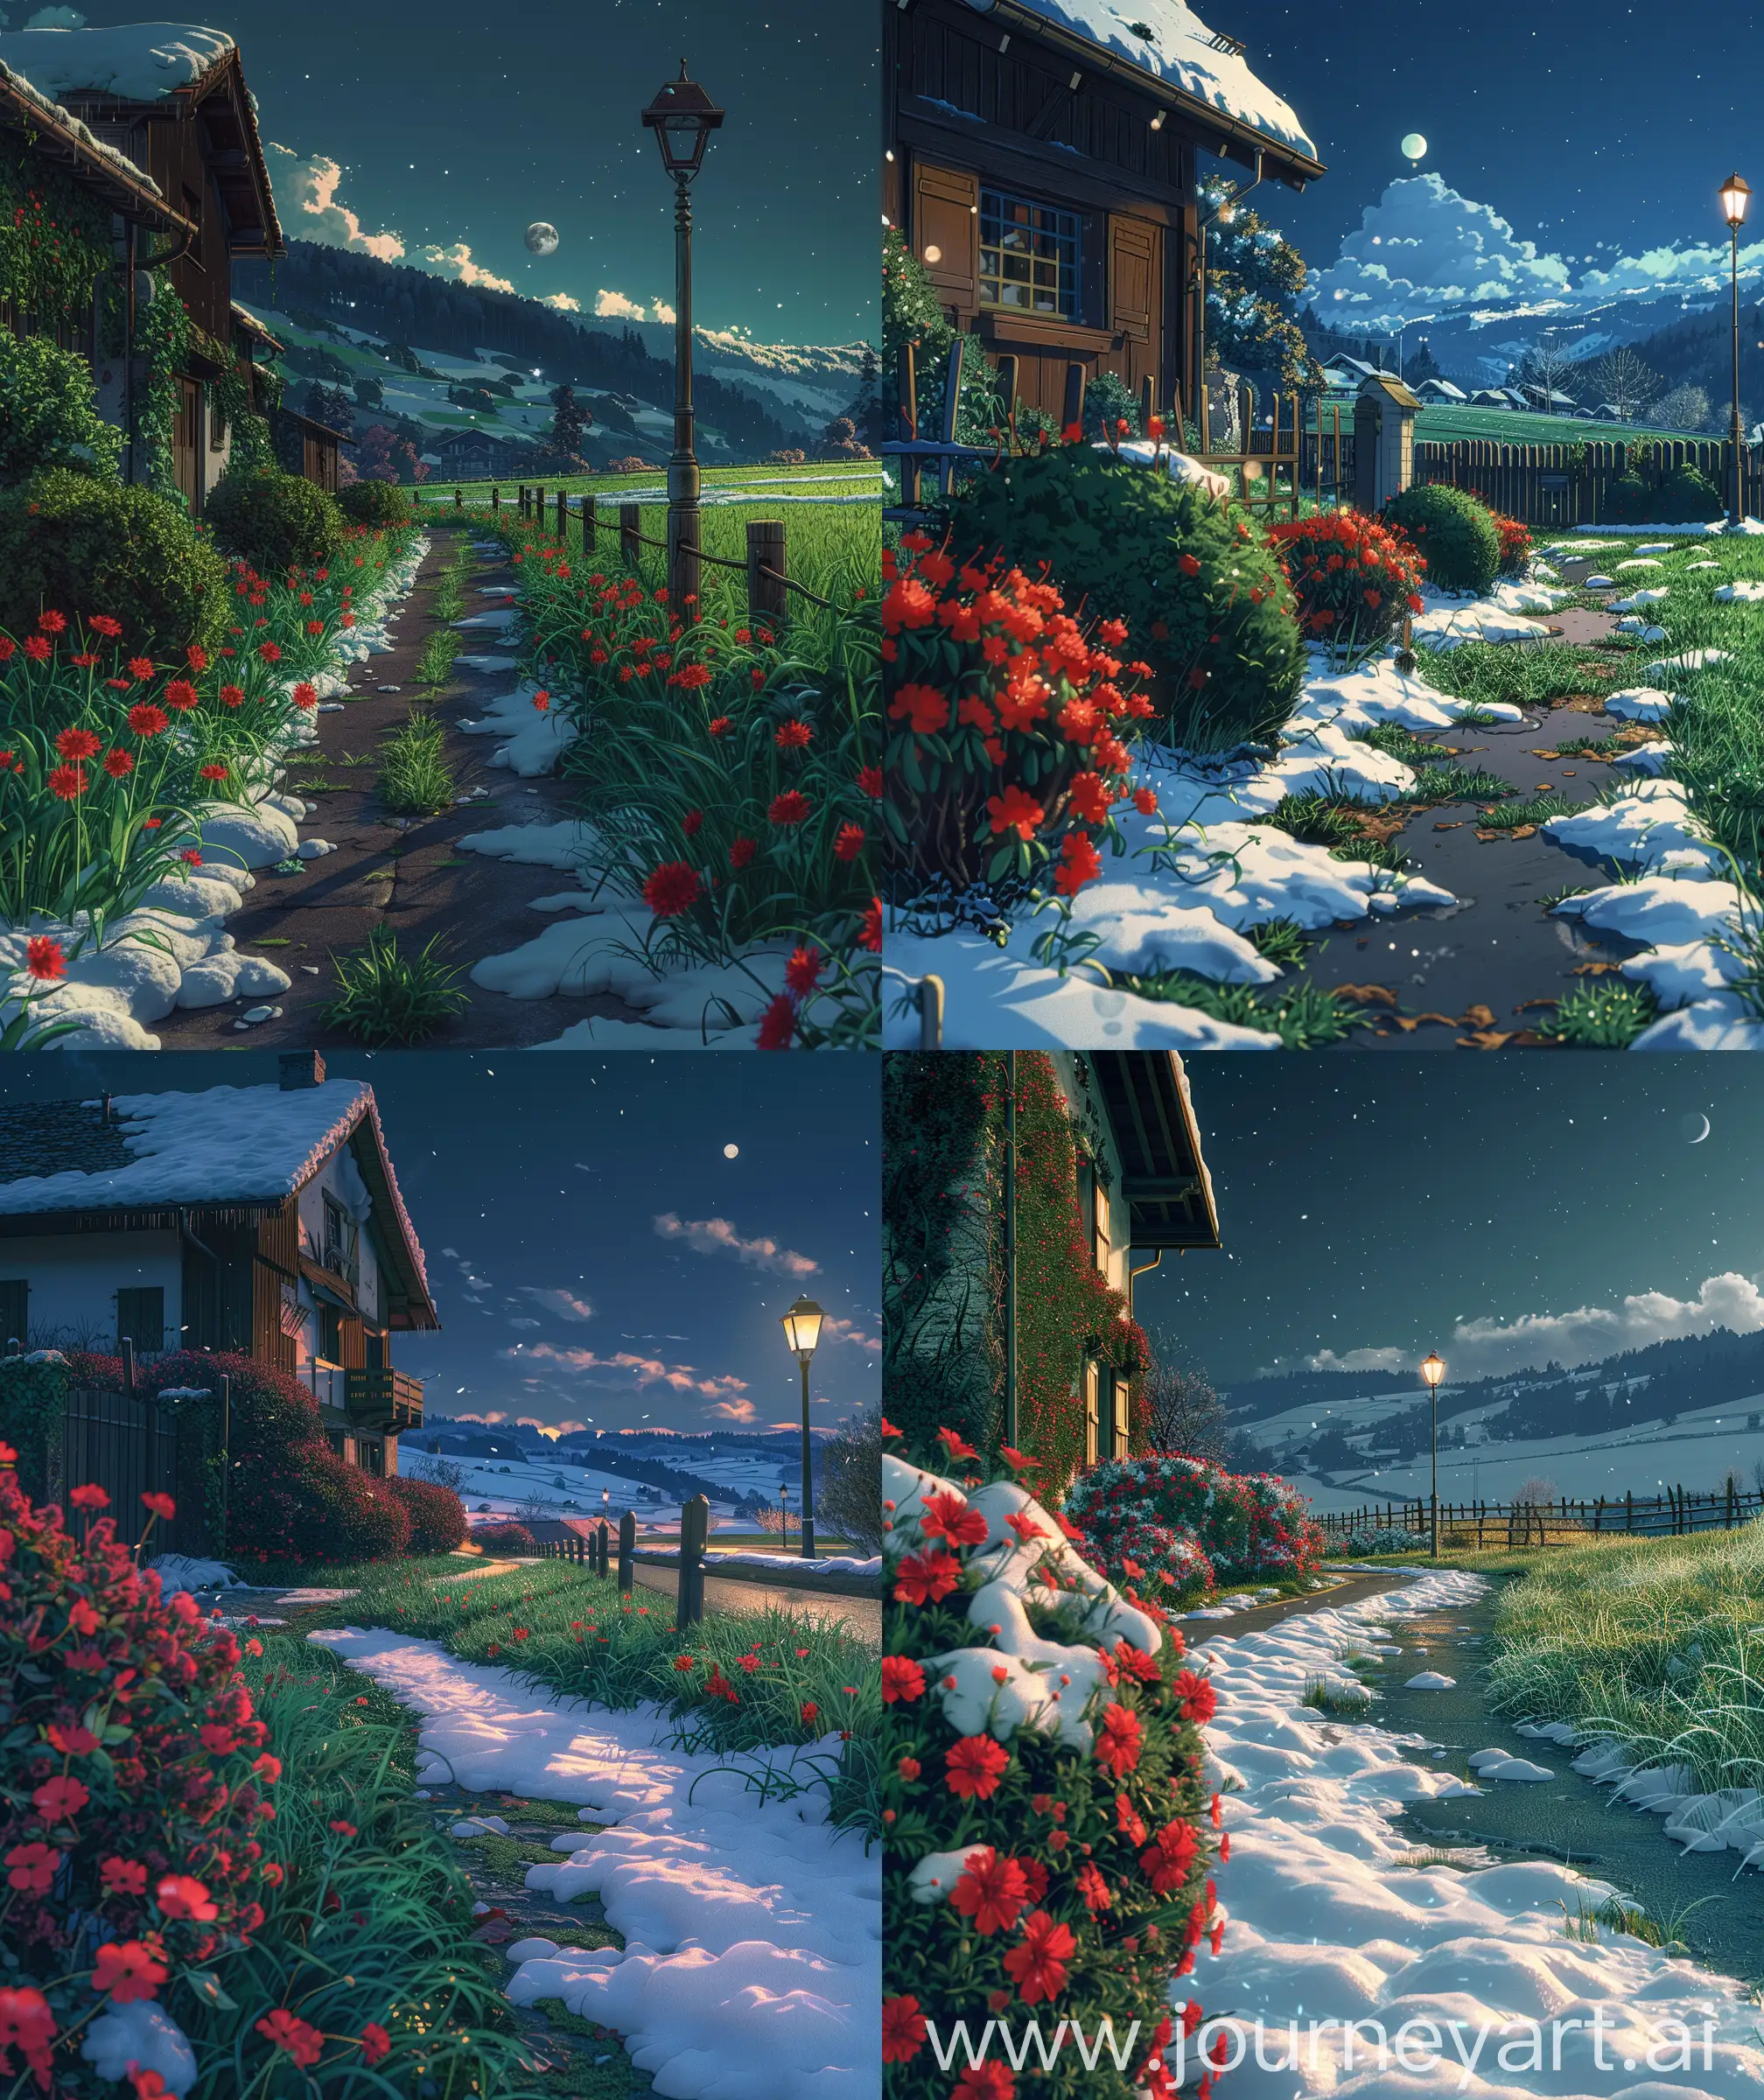 Beautiful anime scenary, mokoto shinkai and Ghibli style mix , direct front facade view of swiss countryside view, melting snow, grass, pavement road, red flowers, street across cottage,  fence, bushes, lamp post,clear night sky, moonlight, " close up, vibrant and quite look, ultra hd, High quality, sharp details, no hyperrealistic --ar 27:32 --s 400